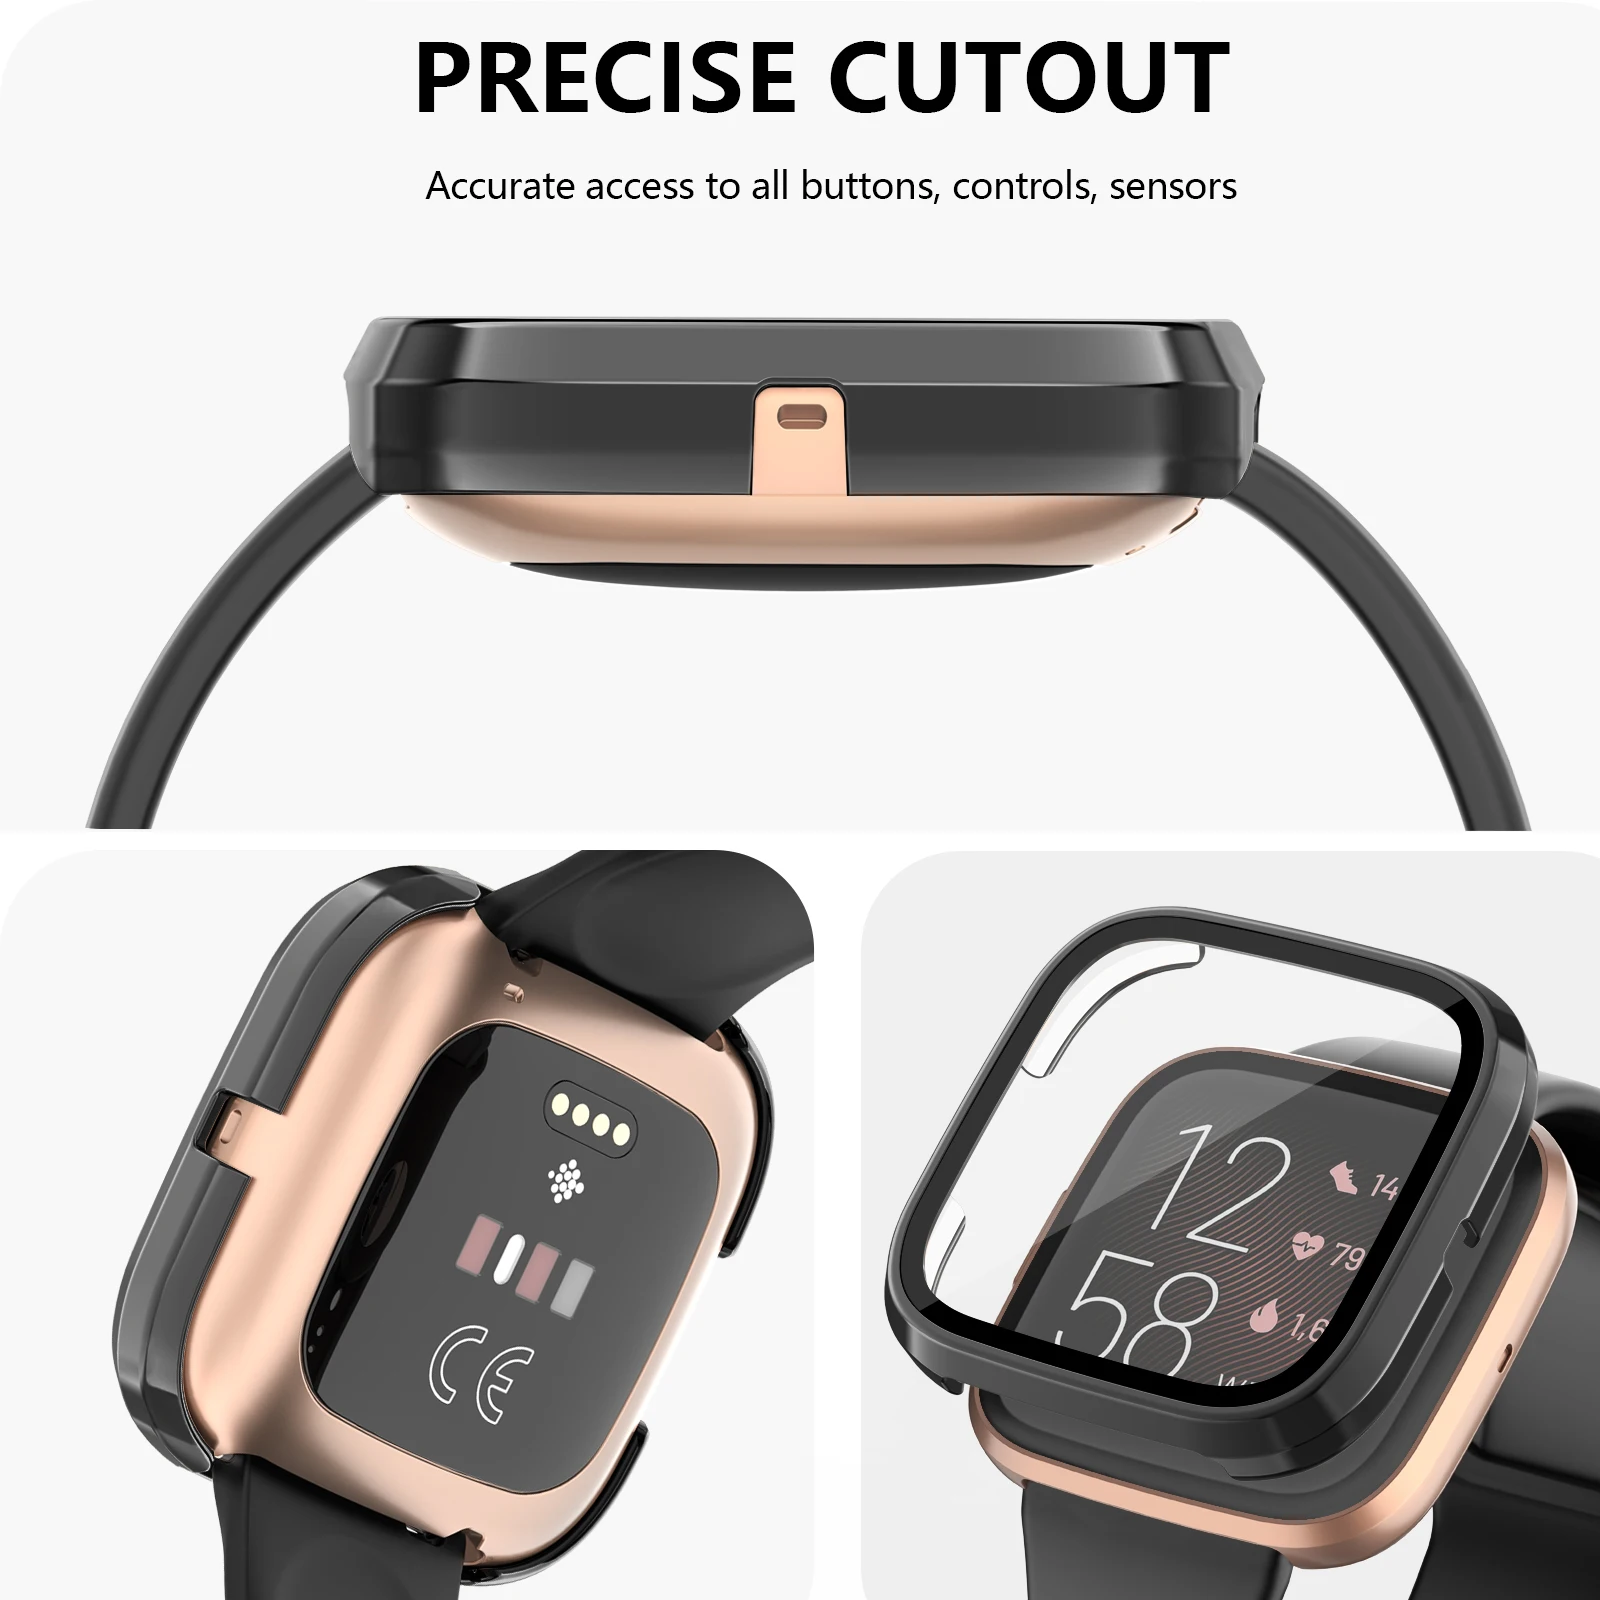 New Tempered Glass Screen Protector Case For Fitbit Versa 3/ Sense Cover Full Cover Bumper Shell For Fitbit Versa 3/ Sense Case